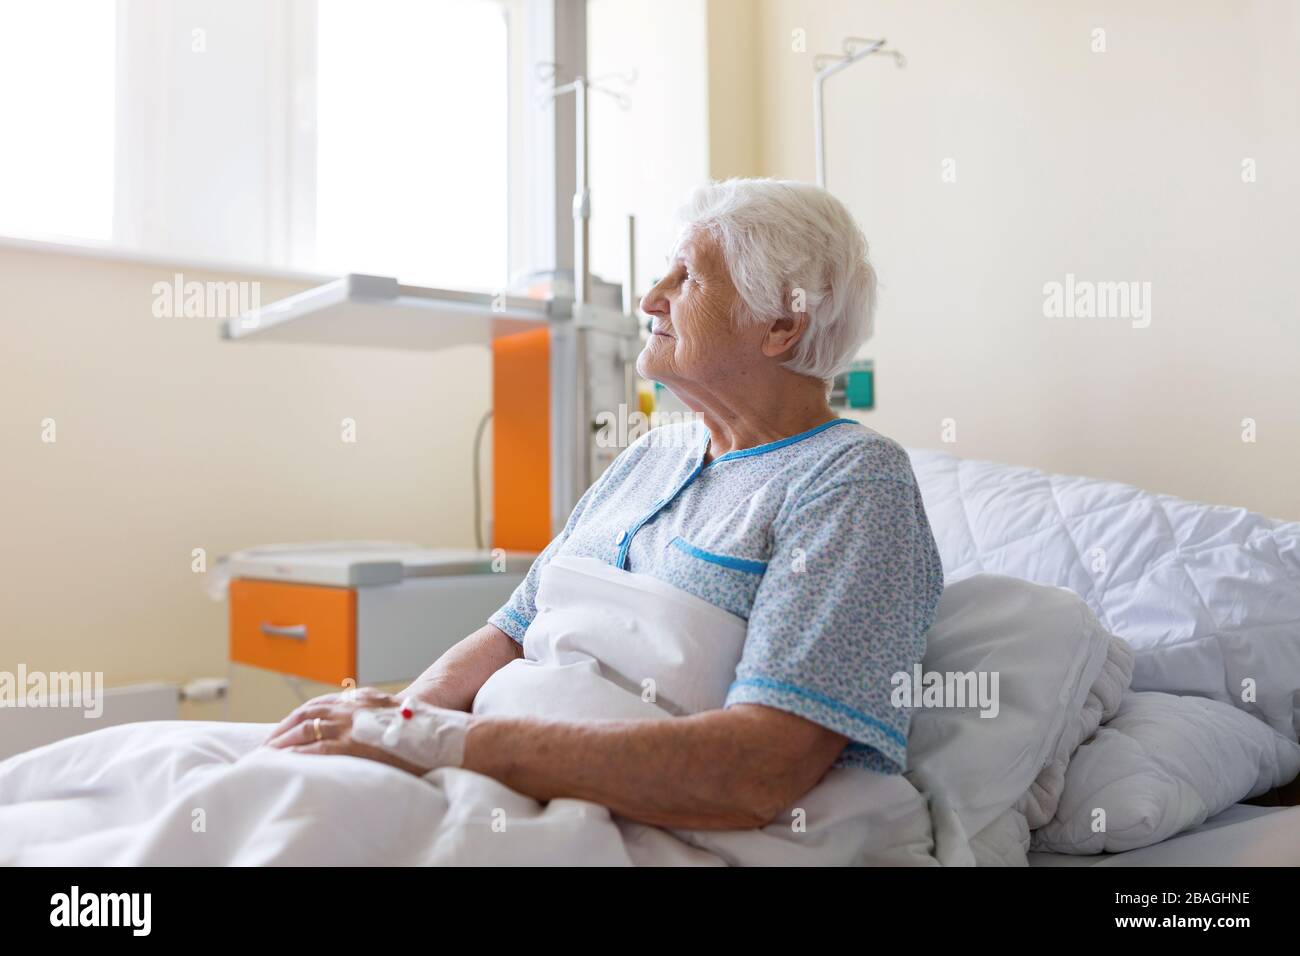 Senior patient in hospital bed Stock Photo